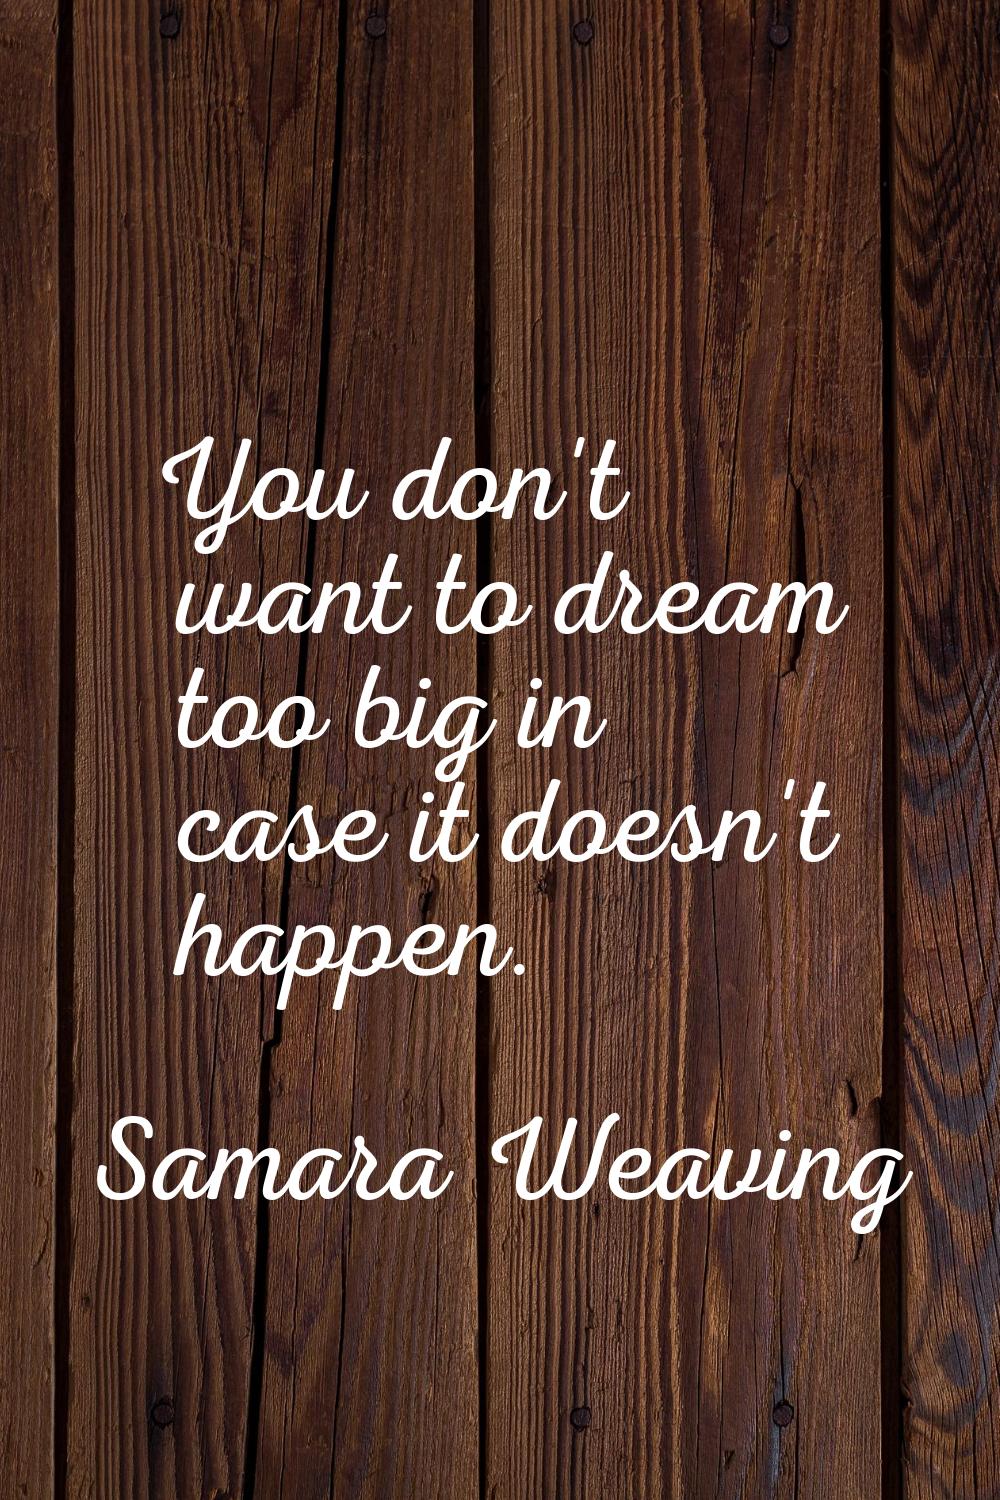 You don't want to dream too big in case it doesn't happen.